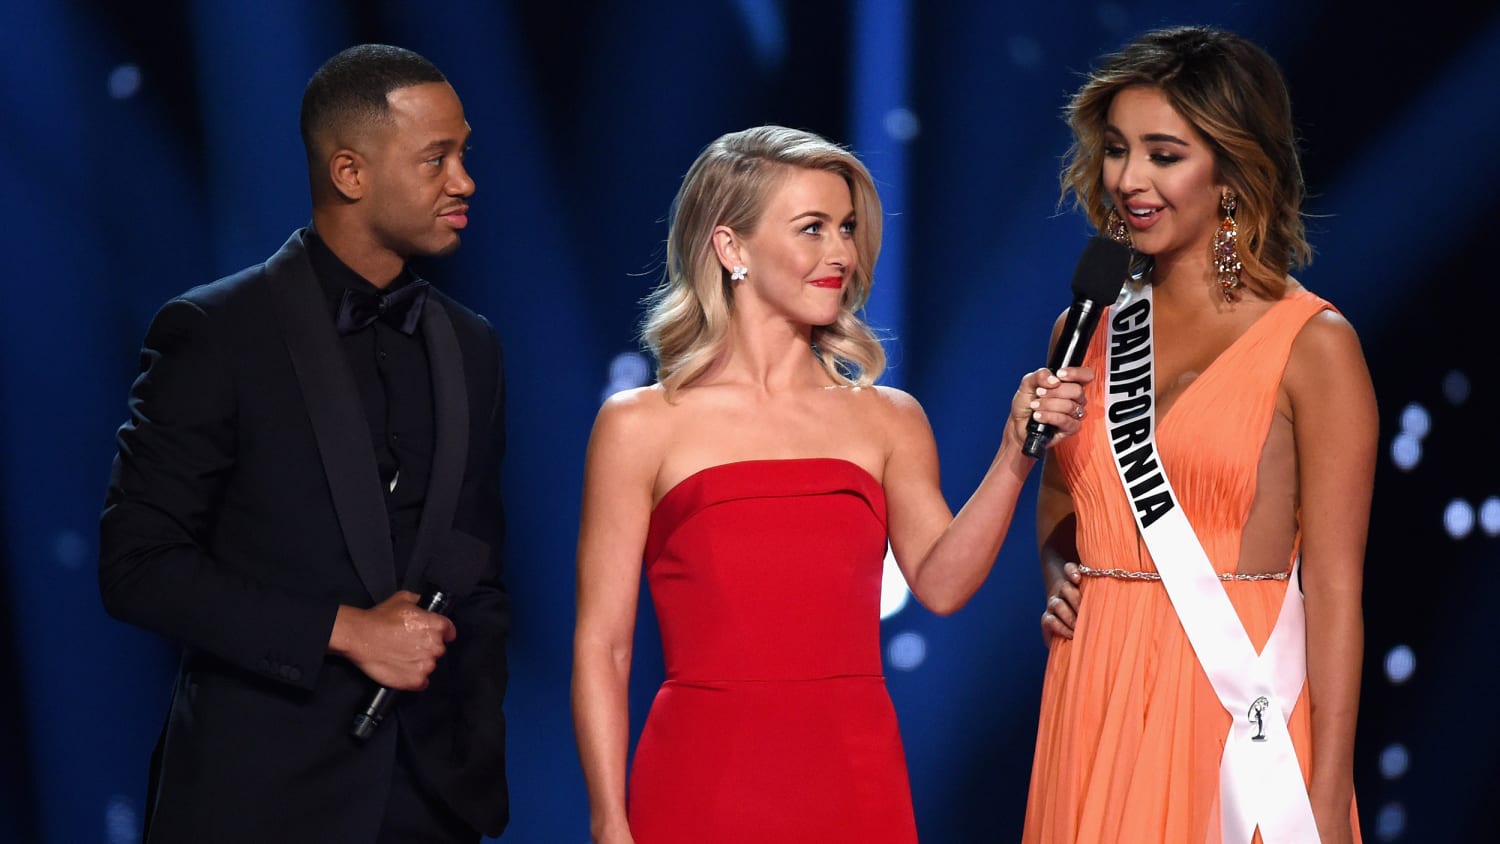 Hours after Miss California flubbed an answer about the economy during the ...